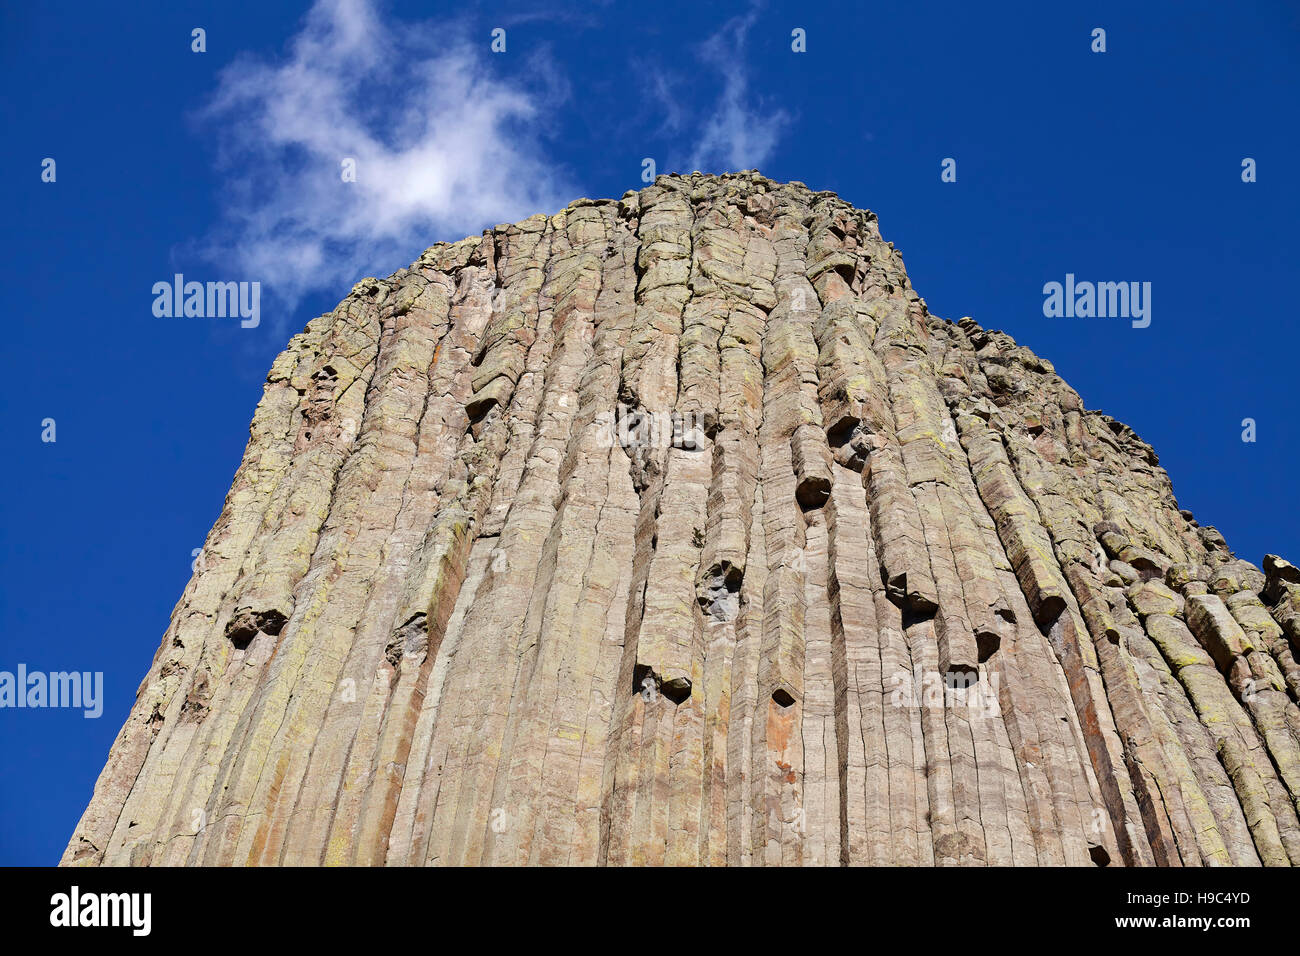 Devils Tower, a laccolith butte composed of igneous rock in the Bear Lodge Mountains, top attraction in Wyoming State, USA. Stock Photo